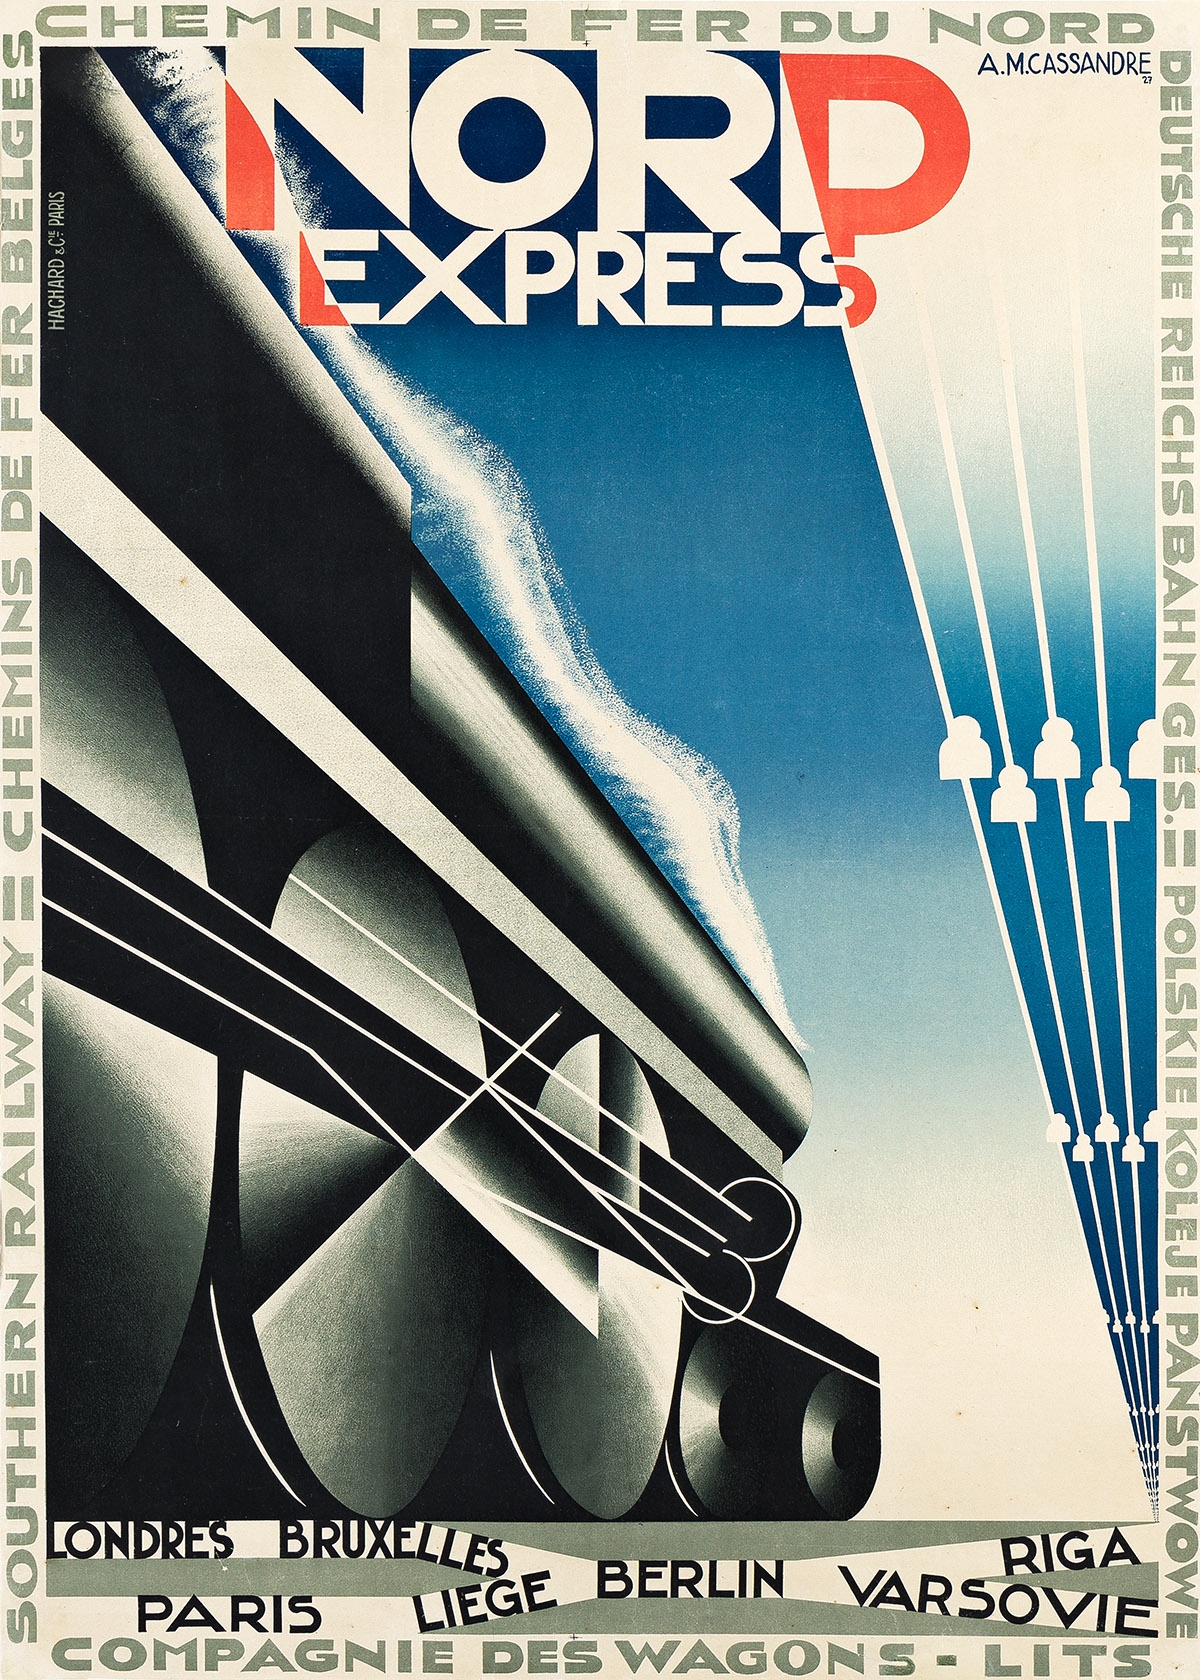 ADOLPHE MOURON CASSANDRE (1901-1968). NORD EXPRESS. 1927. 41x29¼ inches, 104x74¼ cm. by A.M. Cassandre, 1927